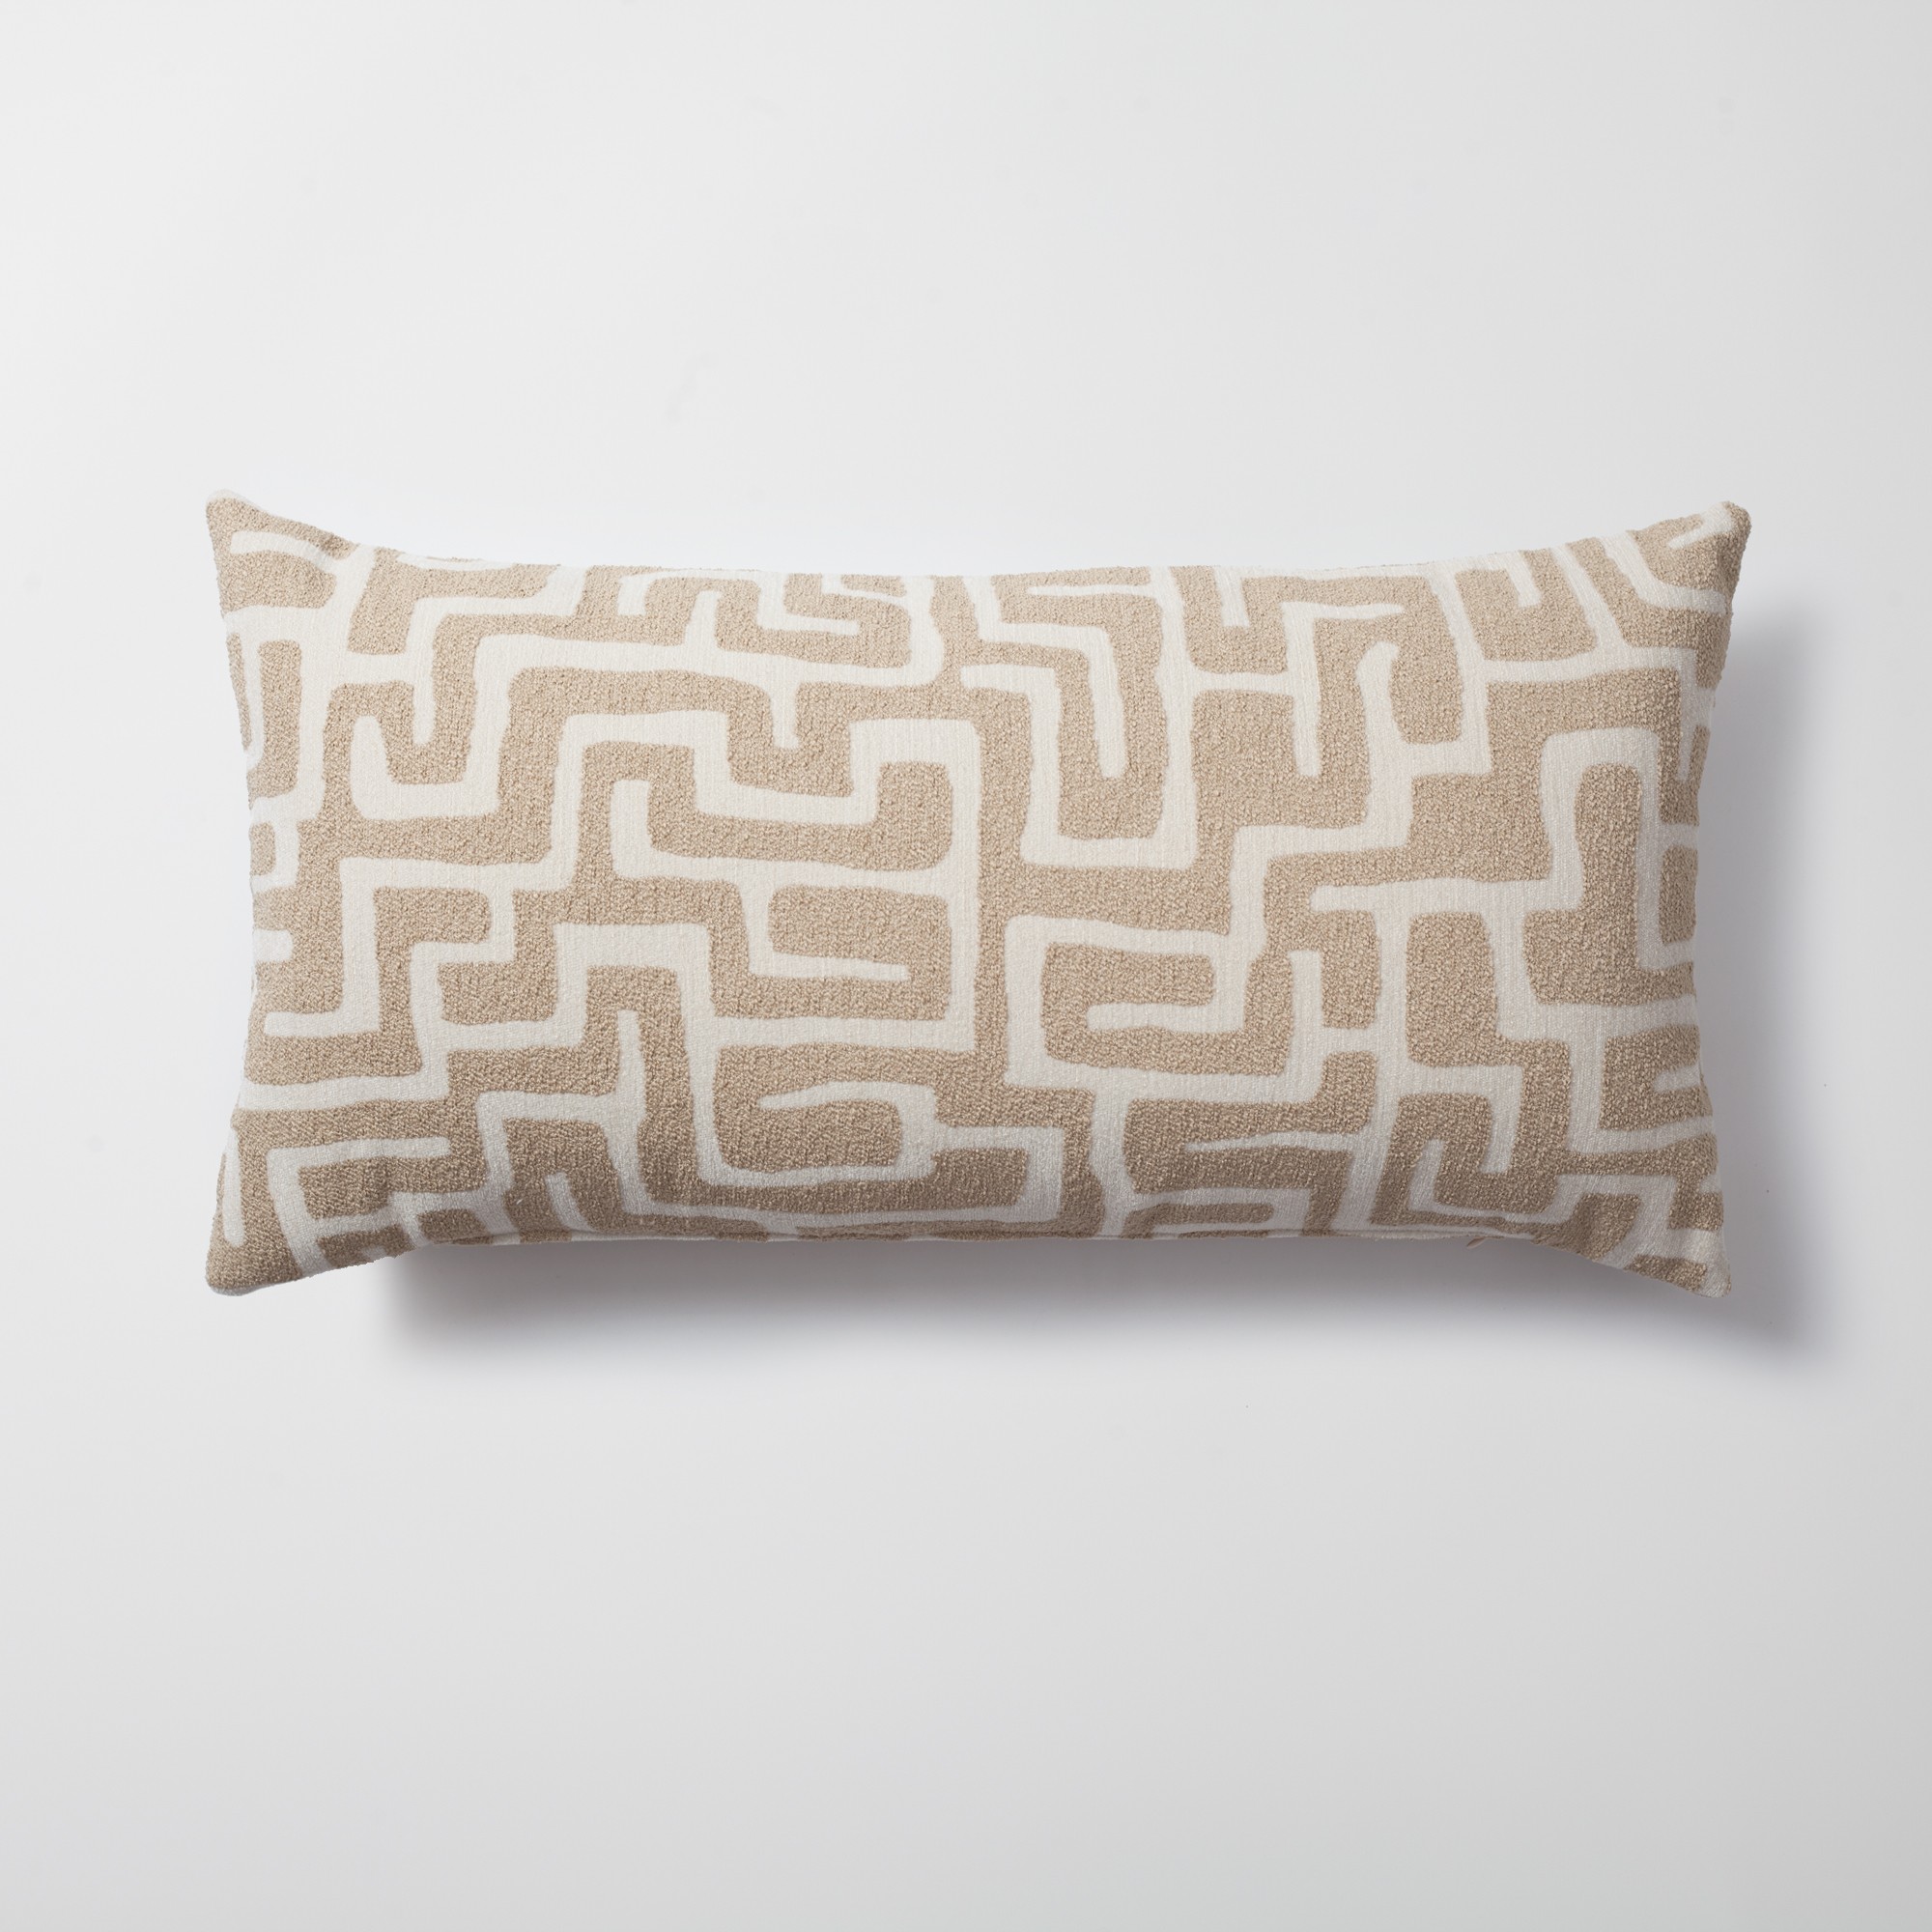 "Norm" - Maze Patterned 14x28 Inch Pillow - Cream (Cover Only)